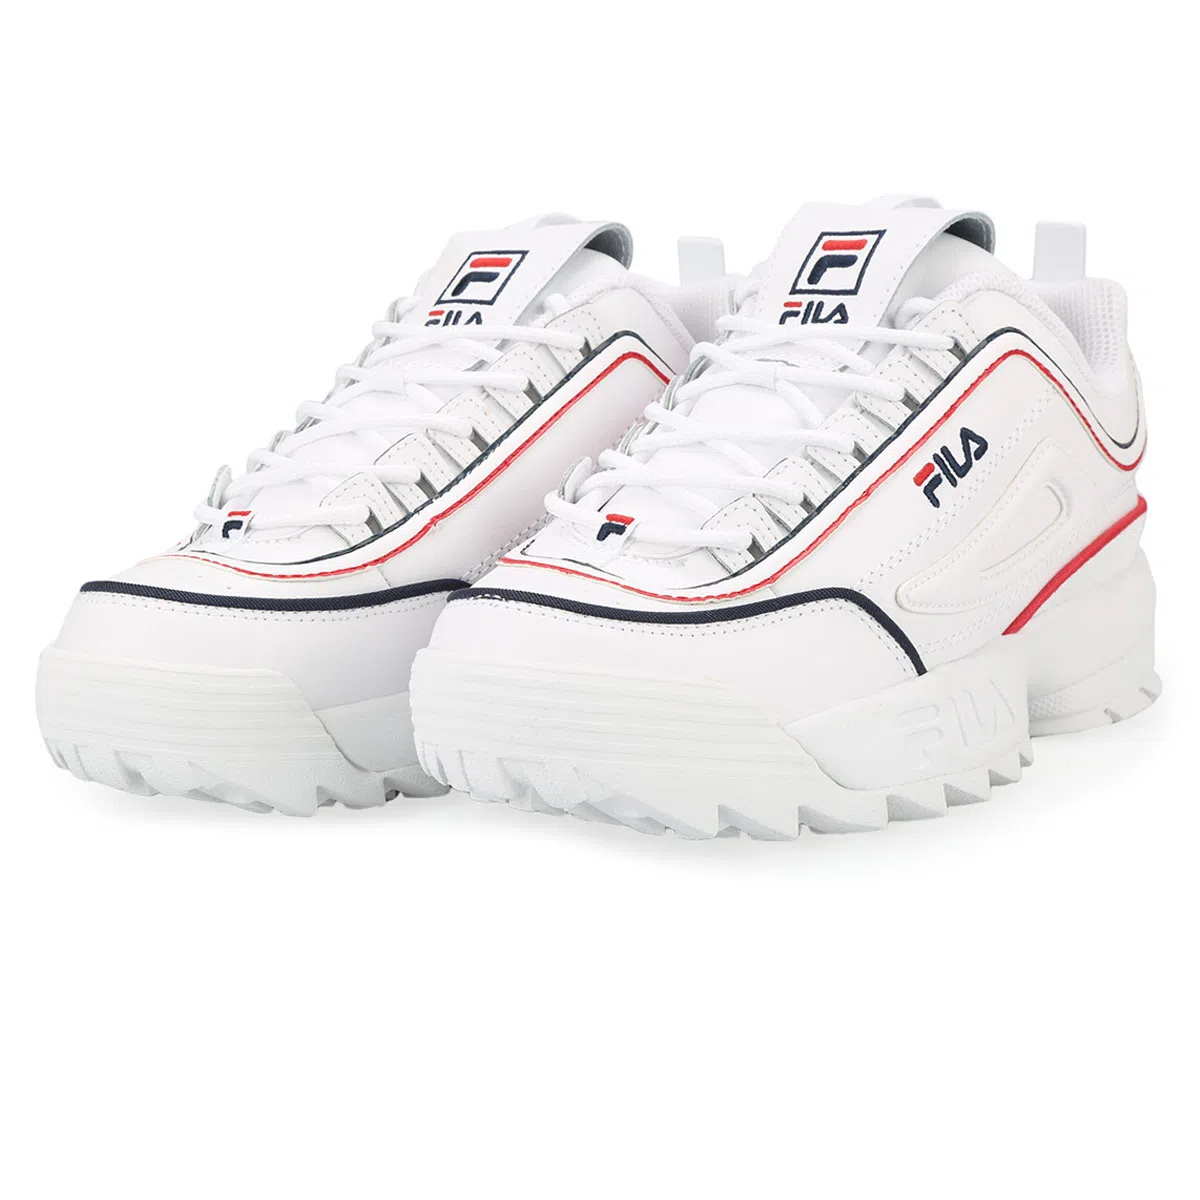 Zapatillas Fila Disruptor II Contrarst Piping,  image number null